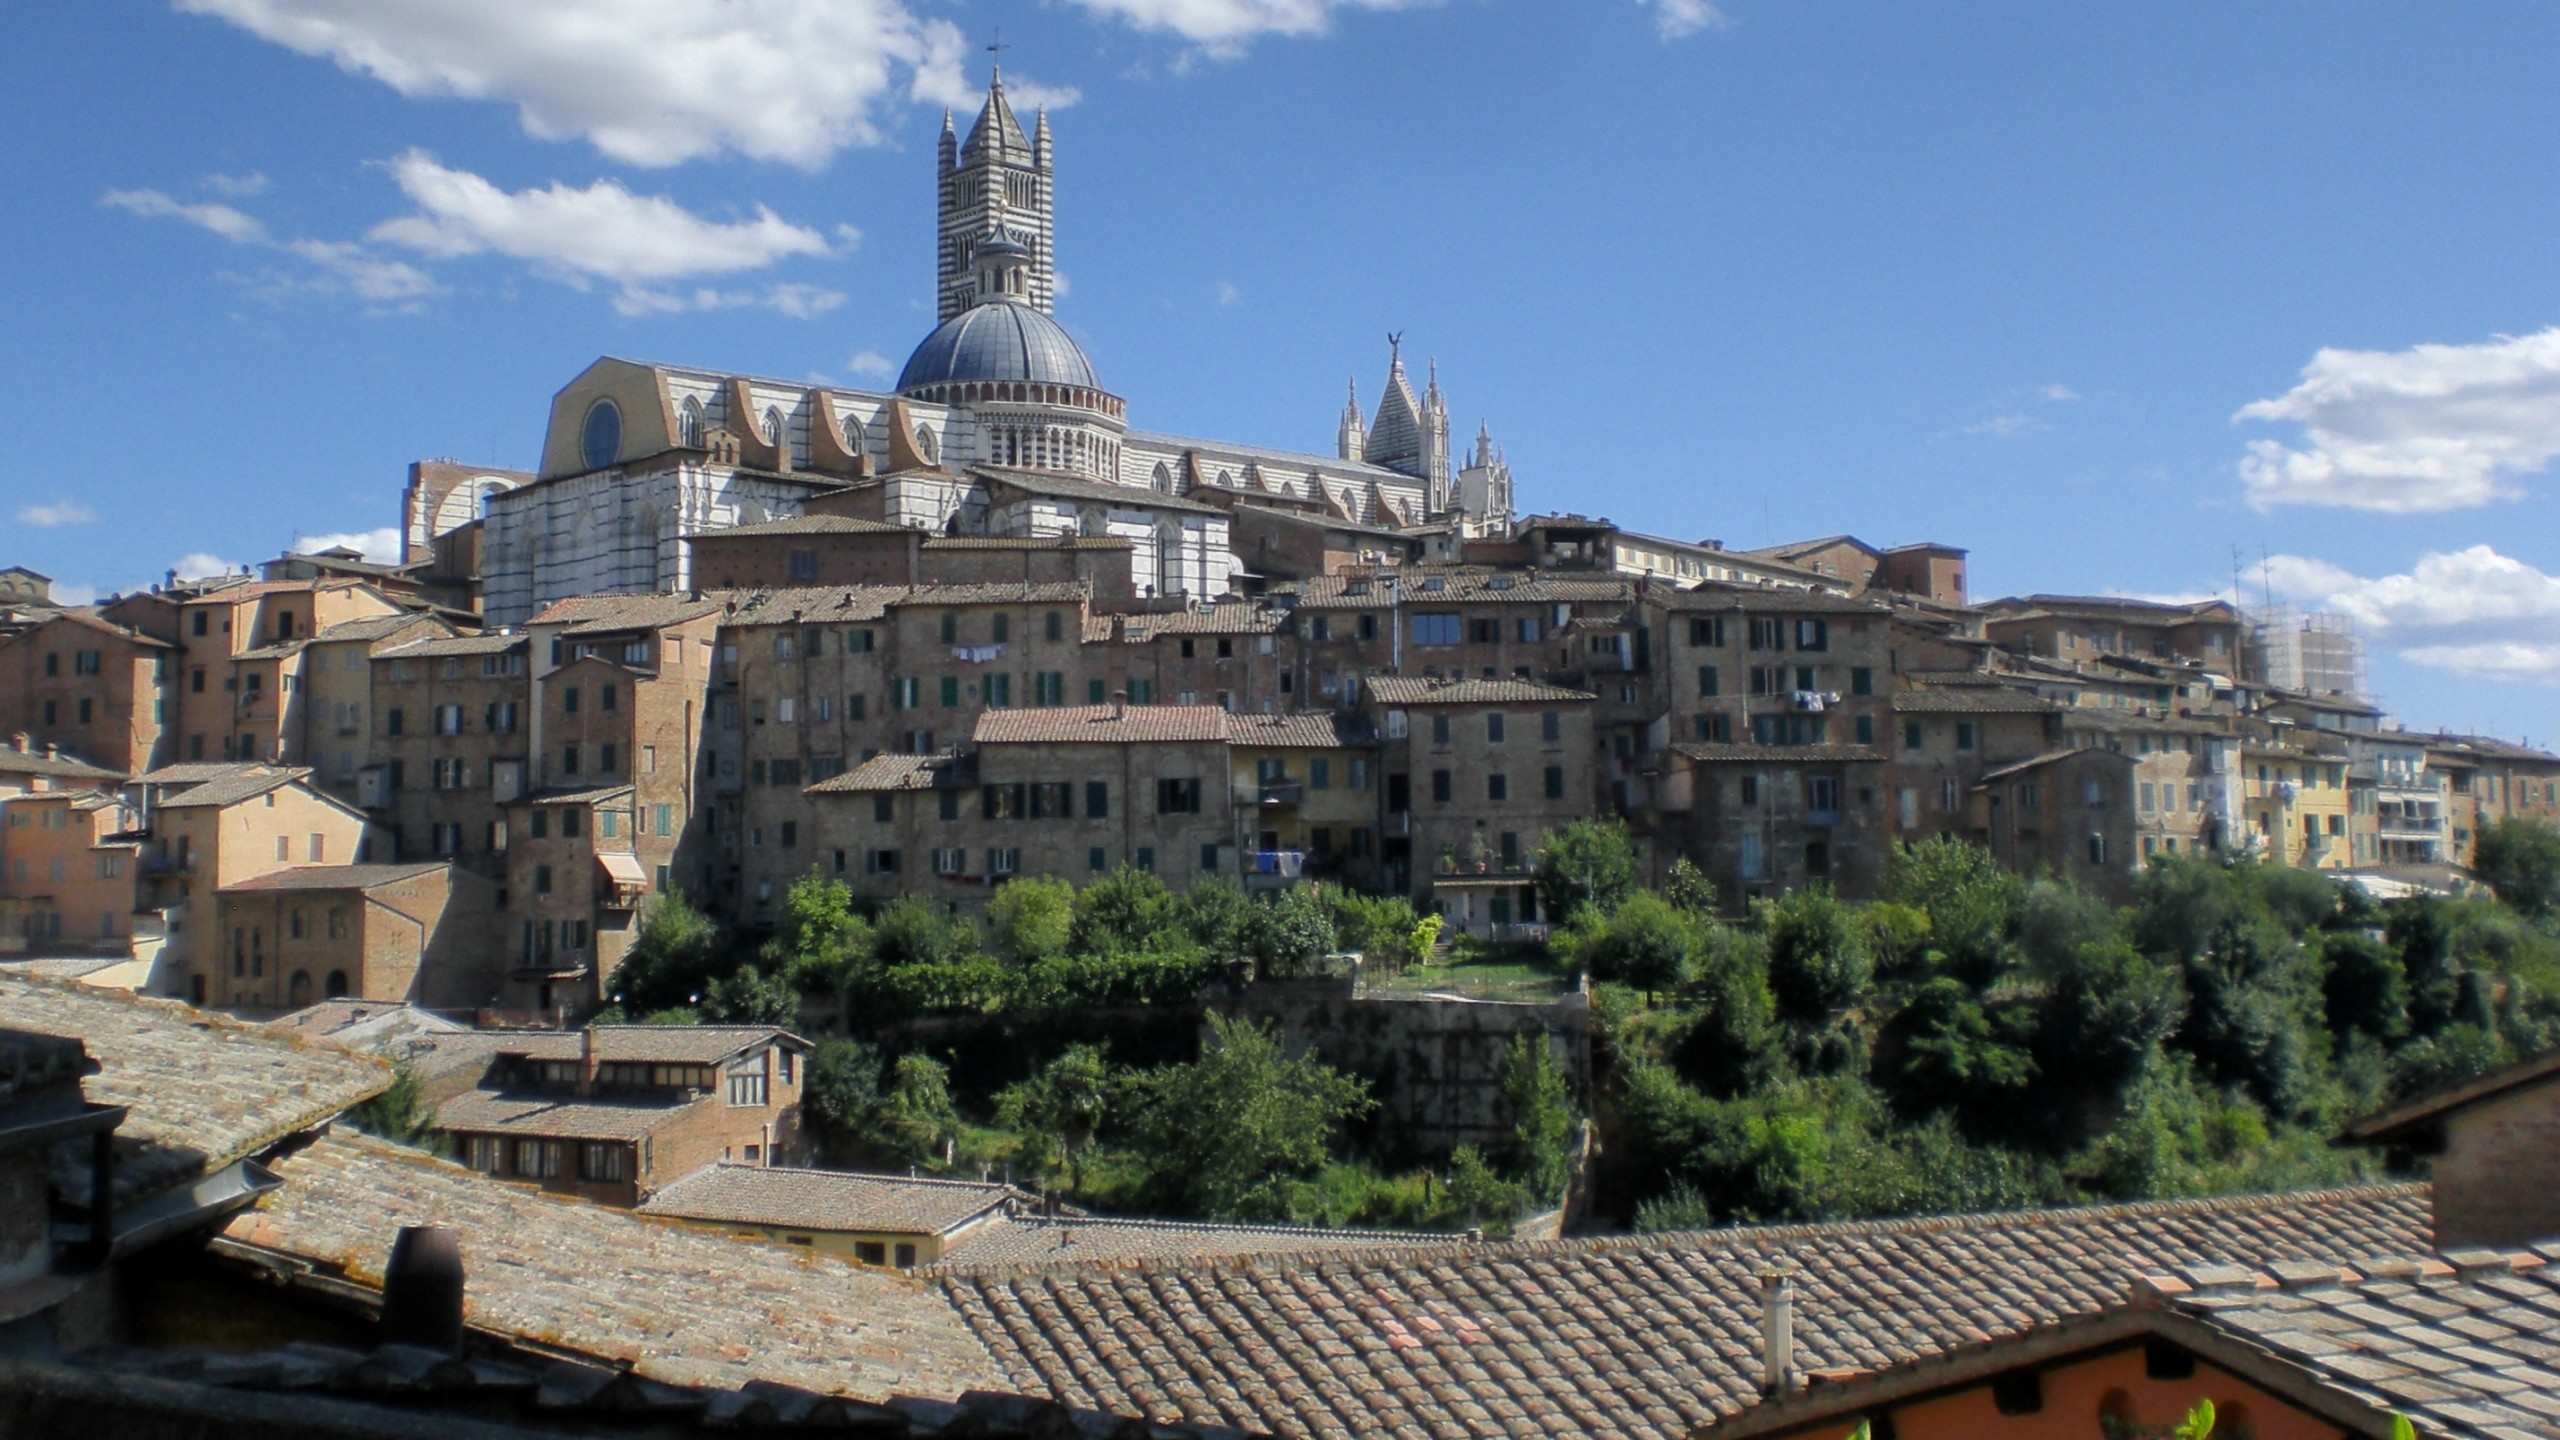 Download Firenze Tuscany Italy, Fly To Tuscany Italy - Siena , HD Wallpaper & Backgrounds